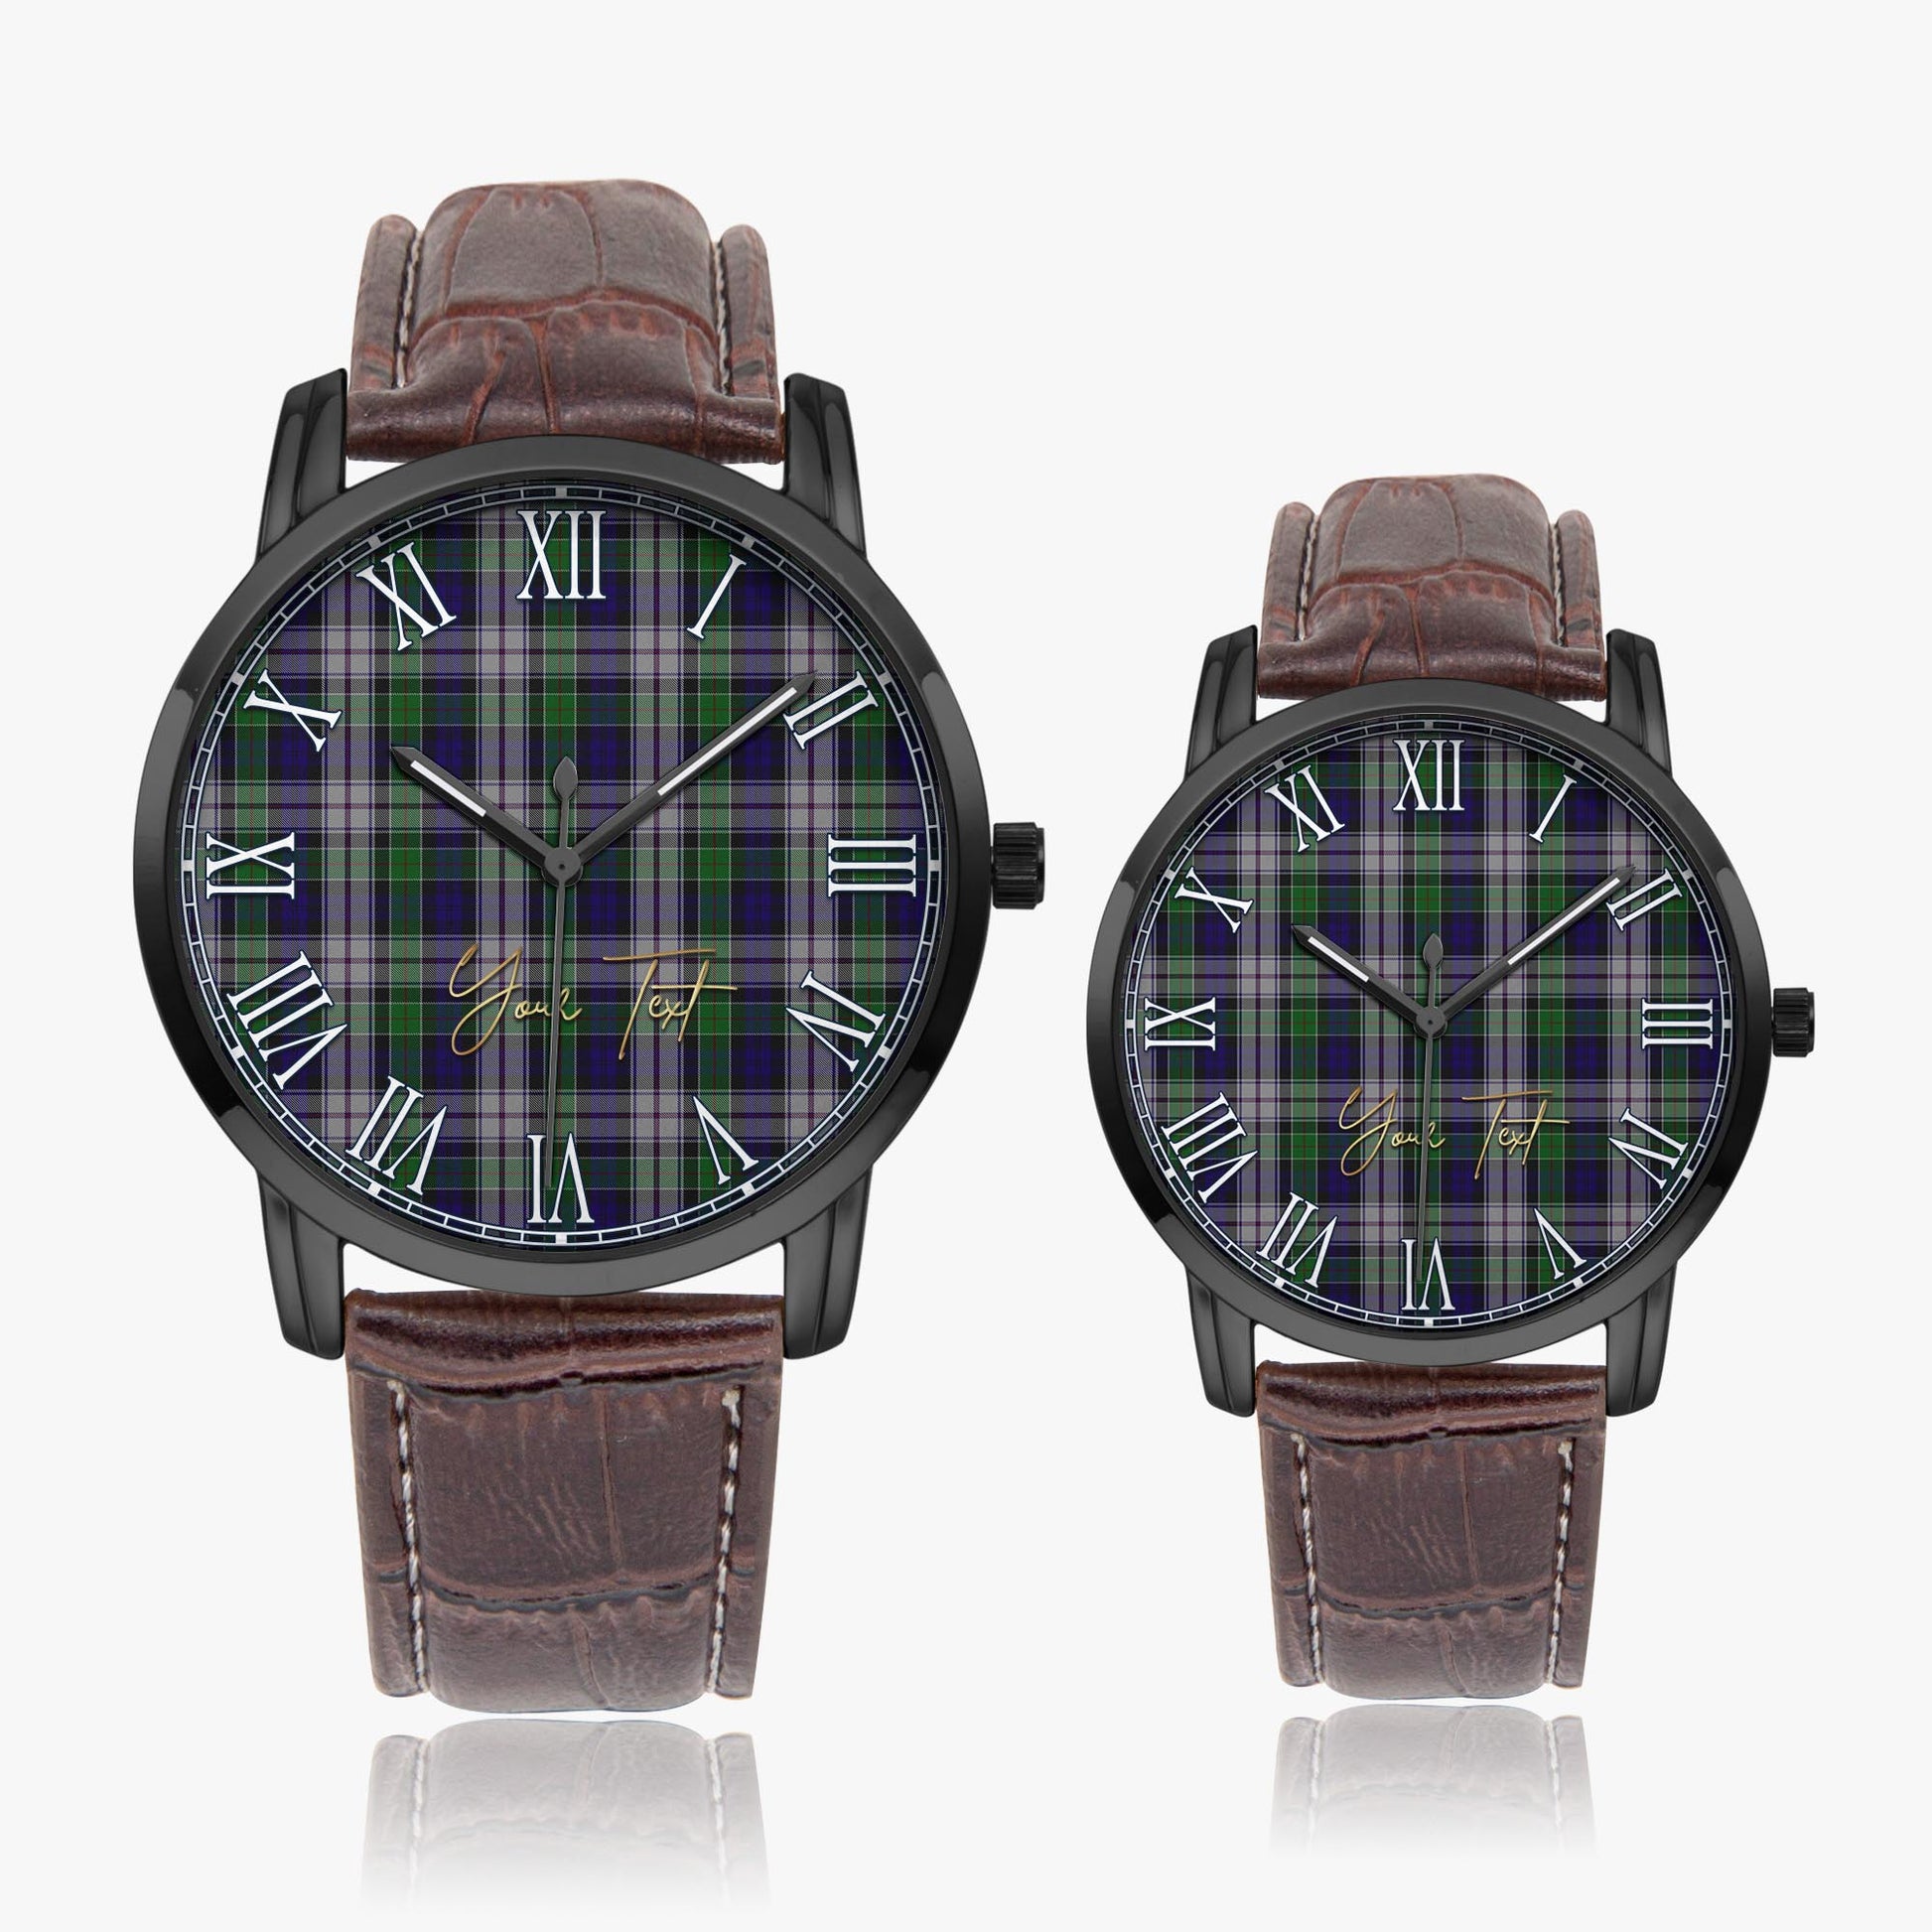 Colquhoun Dress Tartan Personalized Your Text Leather Trap Quartz Watch Wide Type Black Case With Brown Leather Strap - Tartanvibesclothing